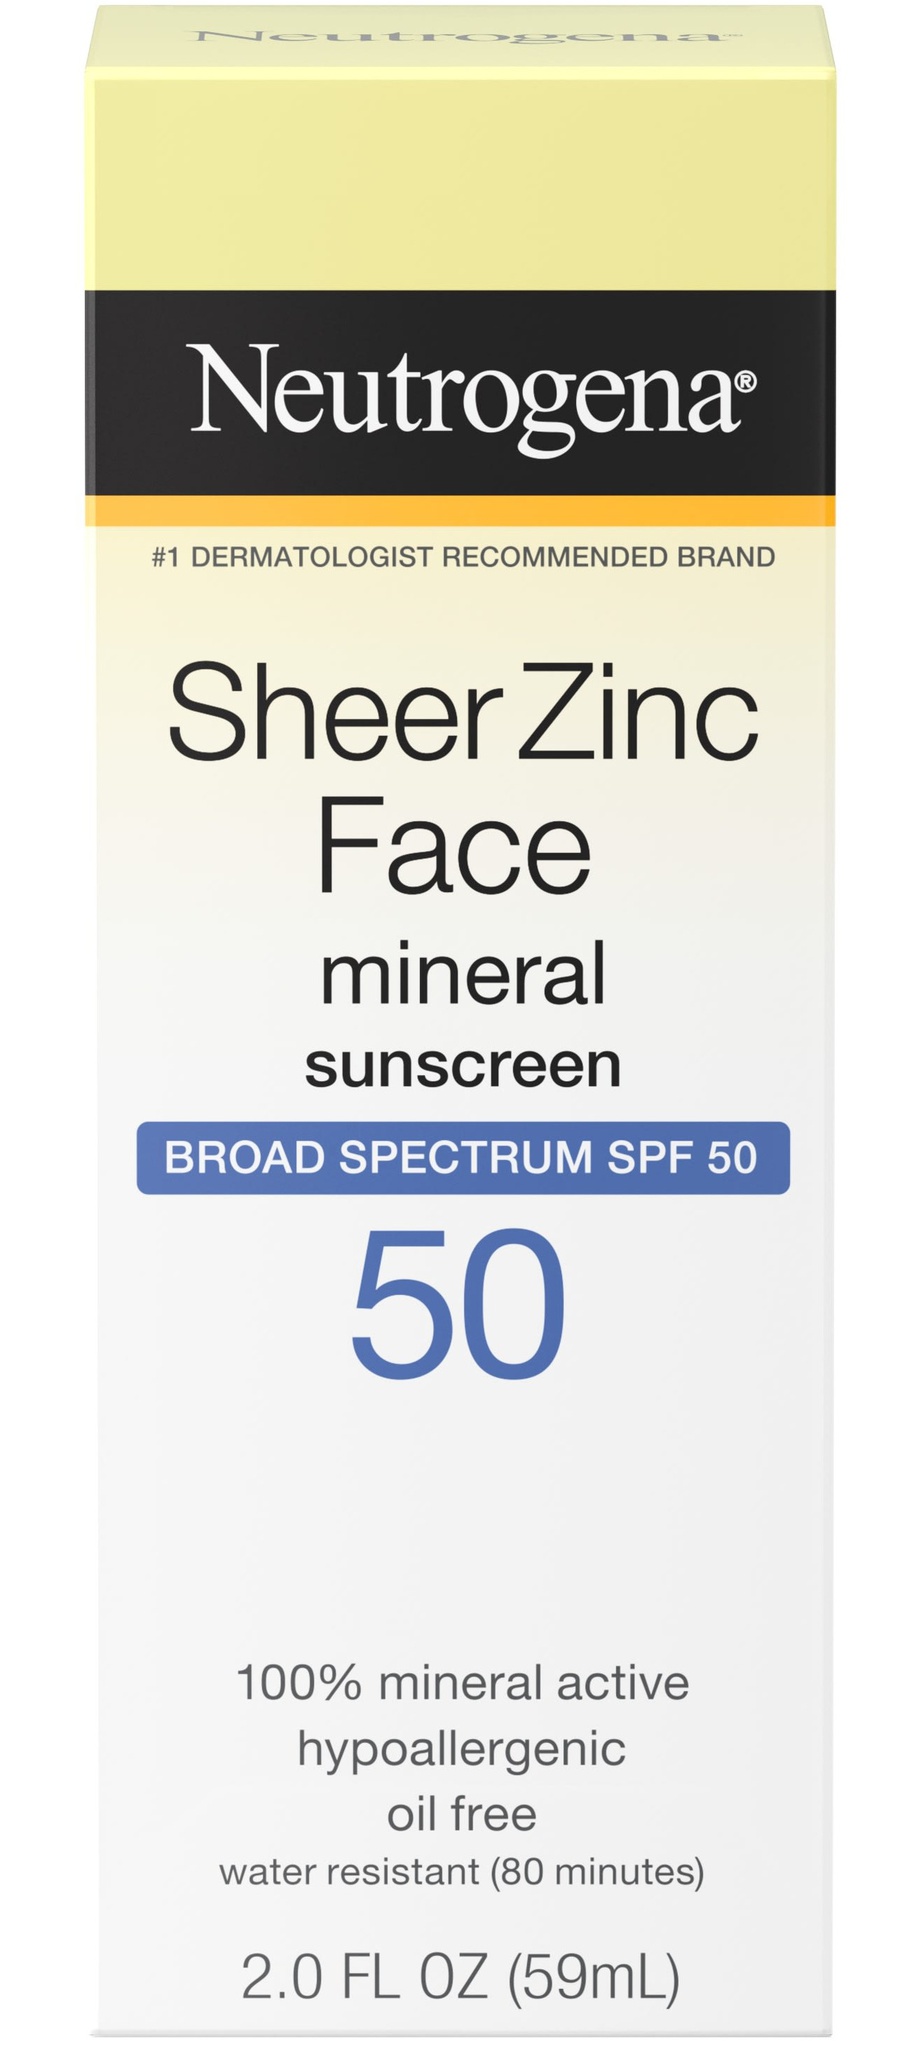 Neutrogena Sheer Zinc Fragrance Free Face Dry Touch Sunscreen Lotion SPF 50